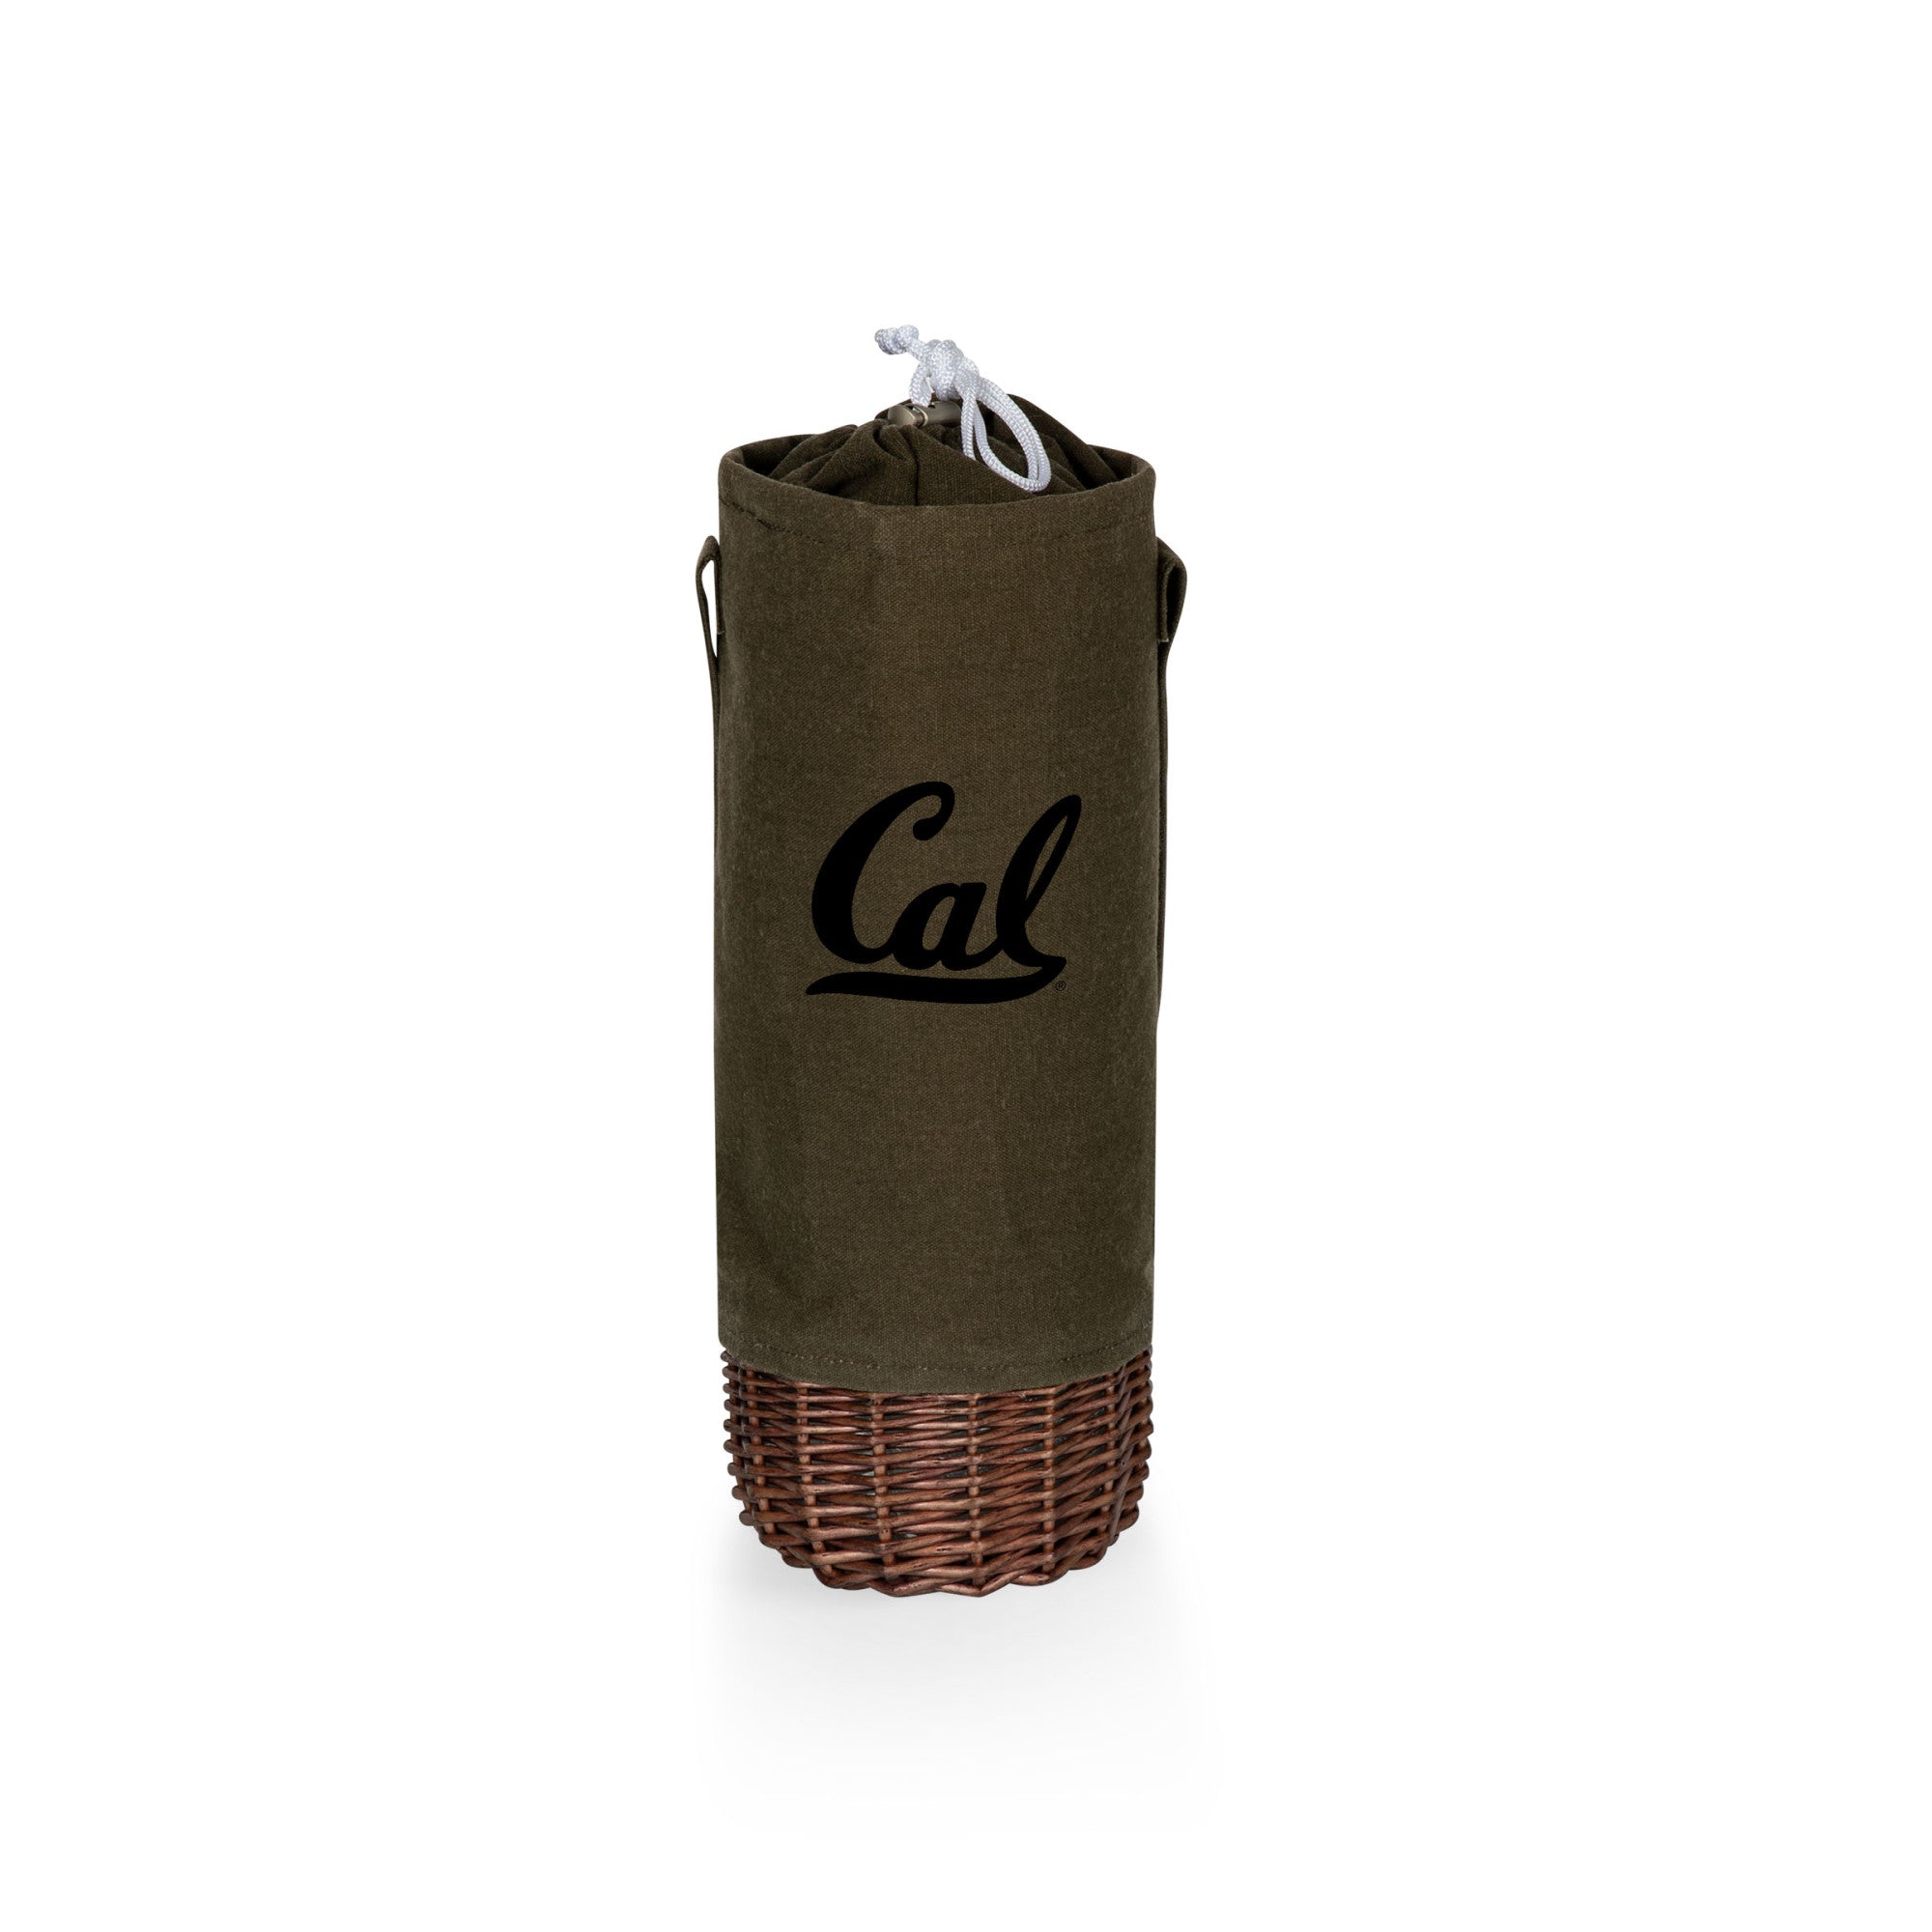 Cal Bears - Malbec Insulated Canvas and Willow Wine Bottle Basket